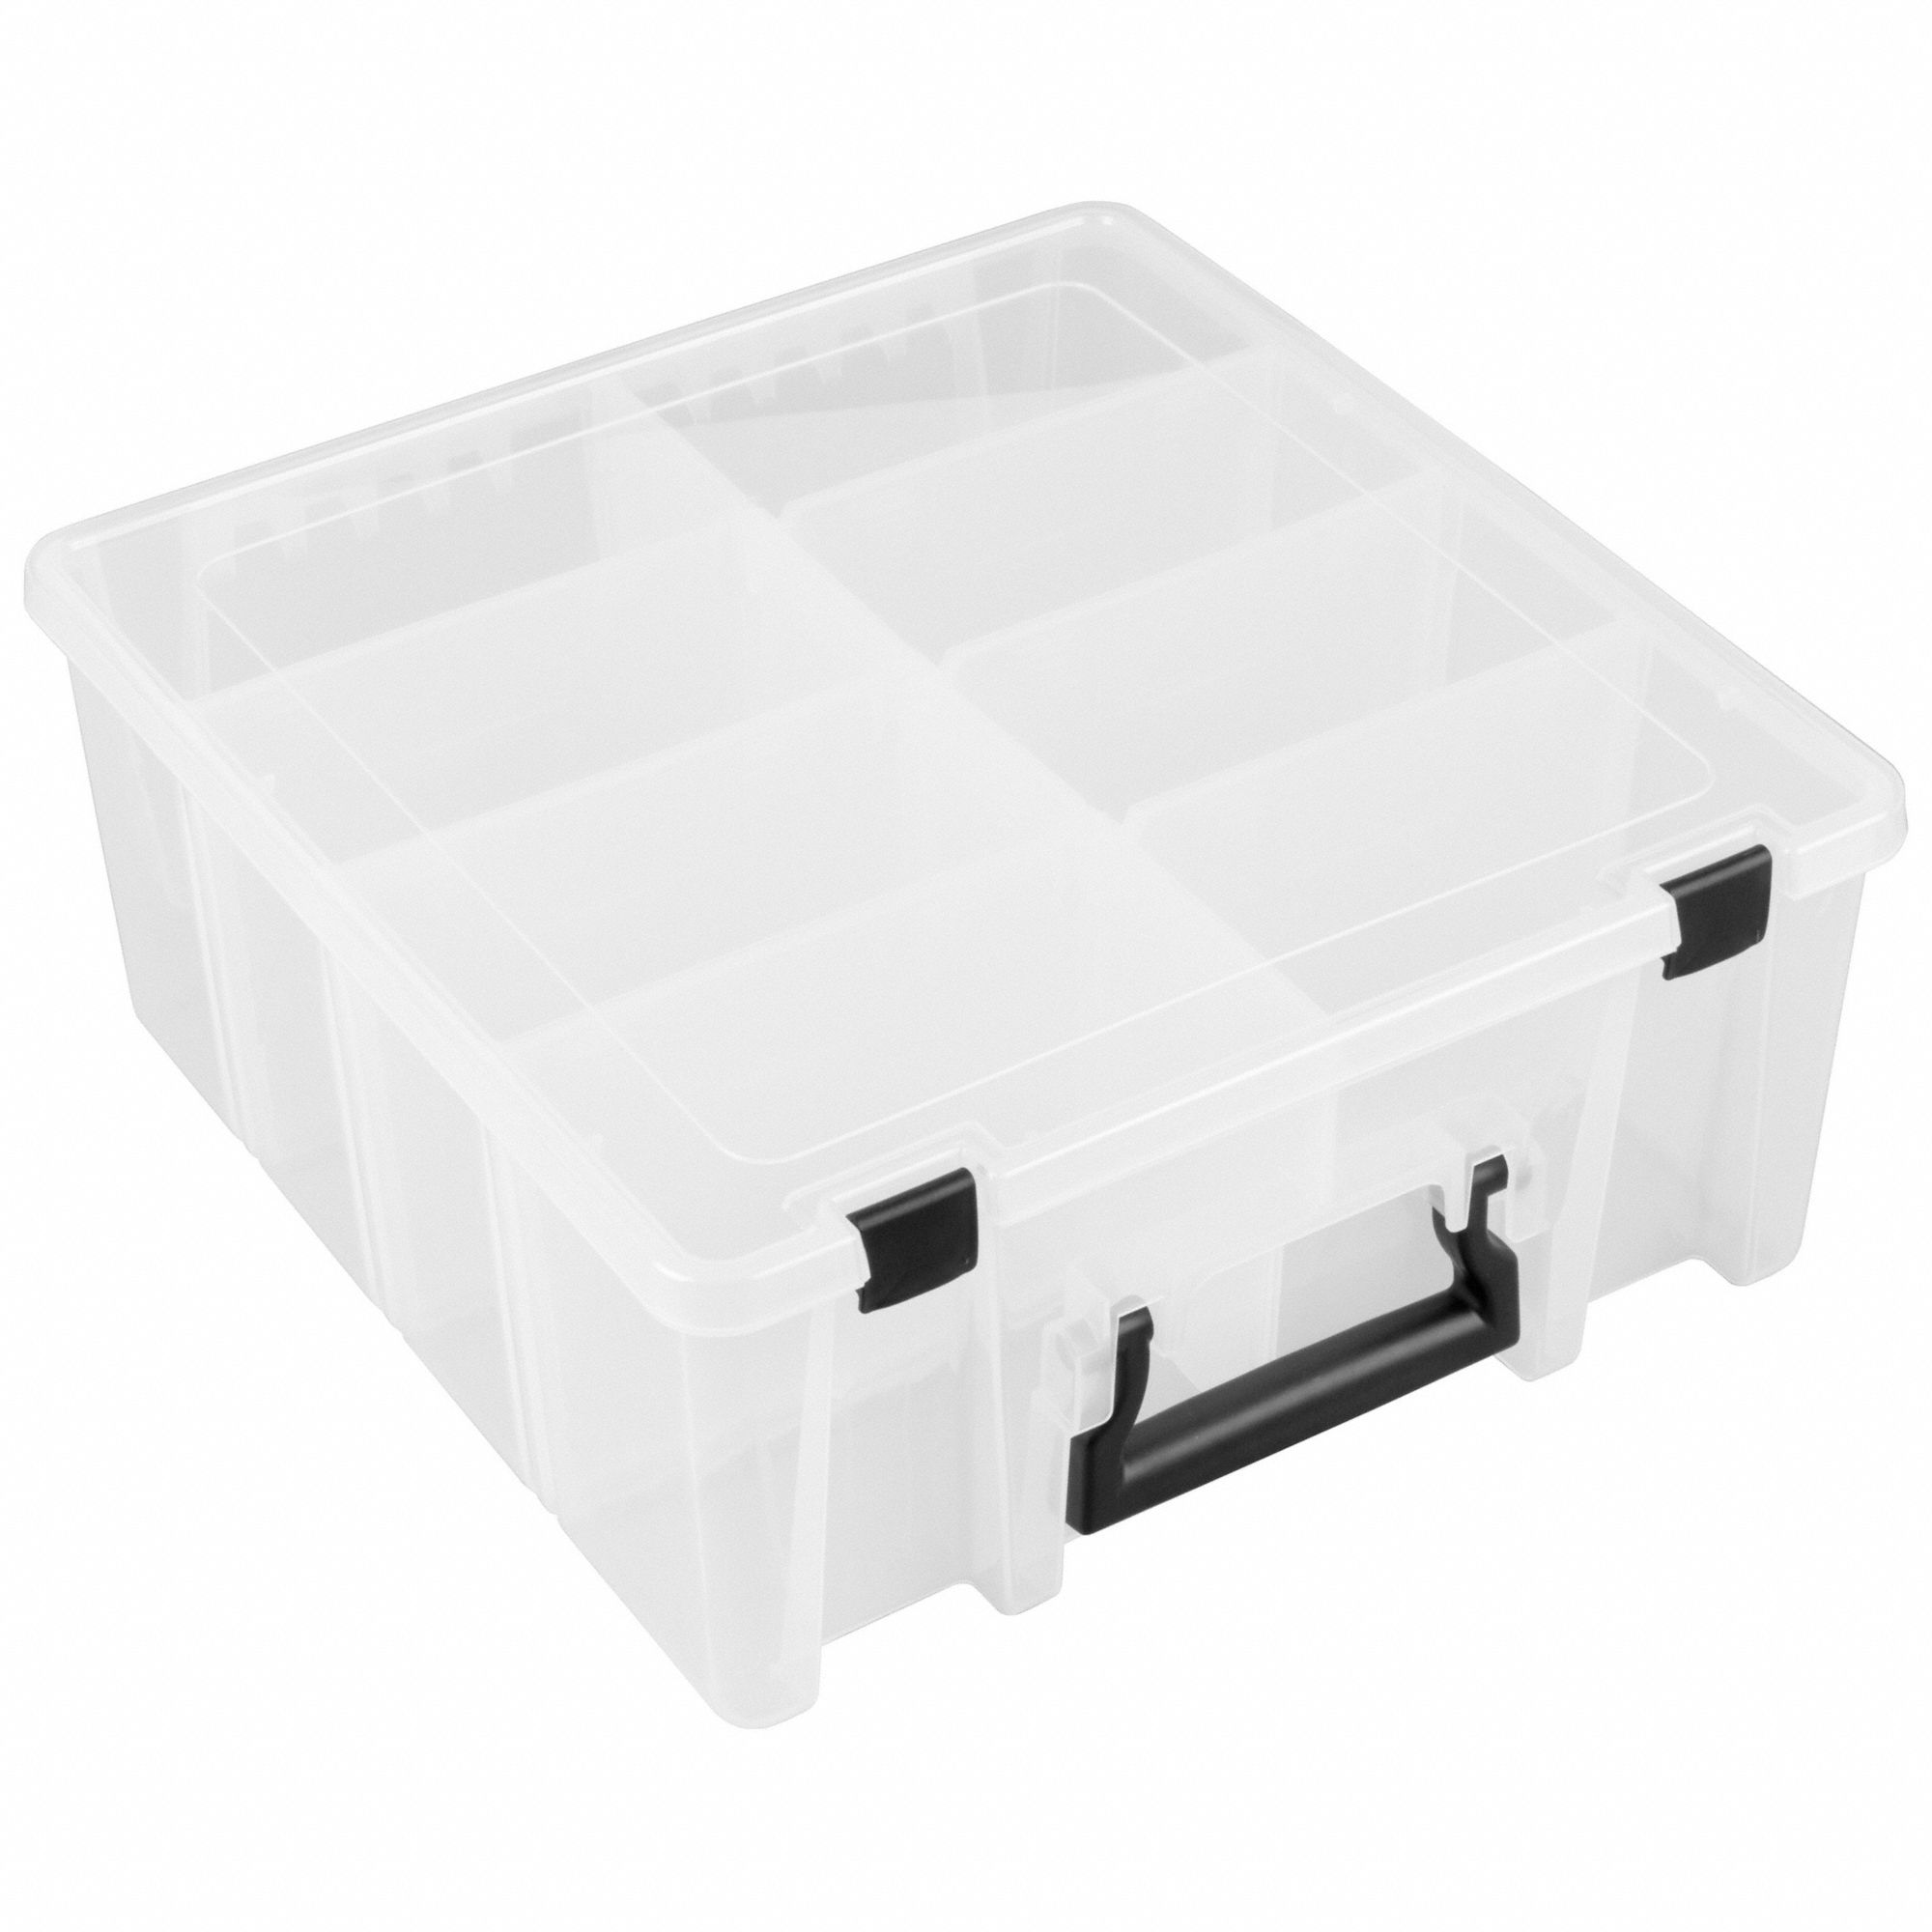 FLAMBEAU, 14 1/8 in x 6 1/4 in, Clear, Adjustable Compartment Box -  30C451